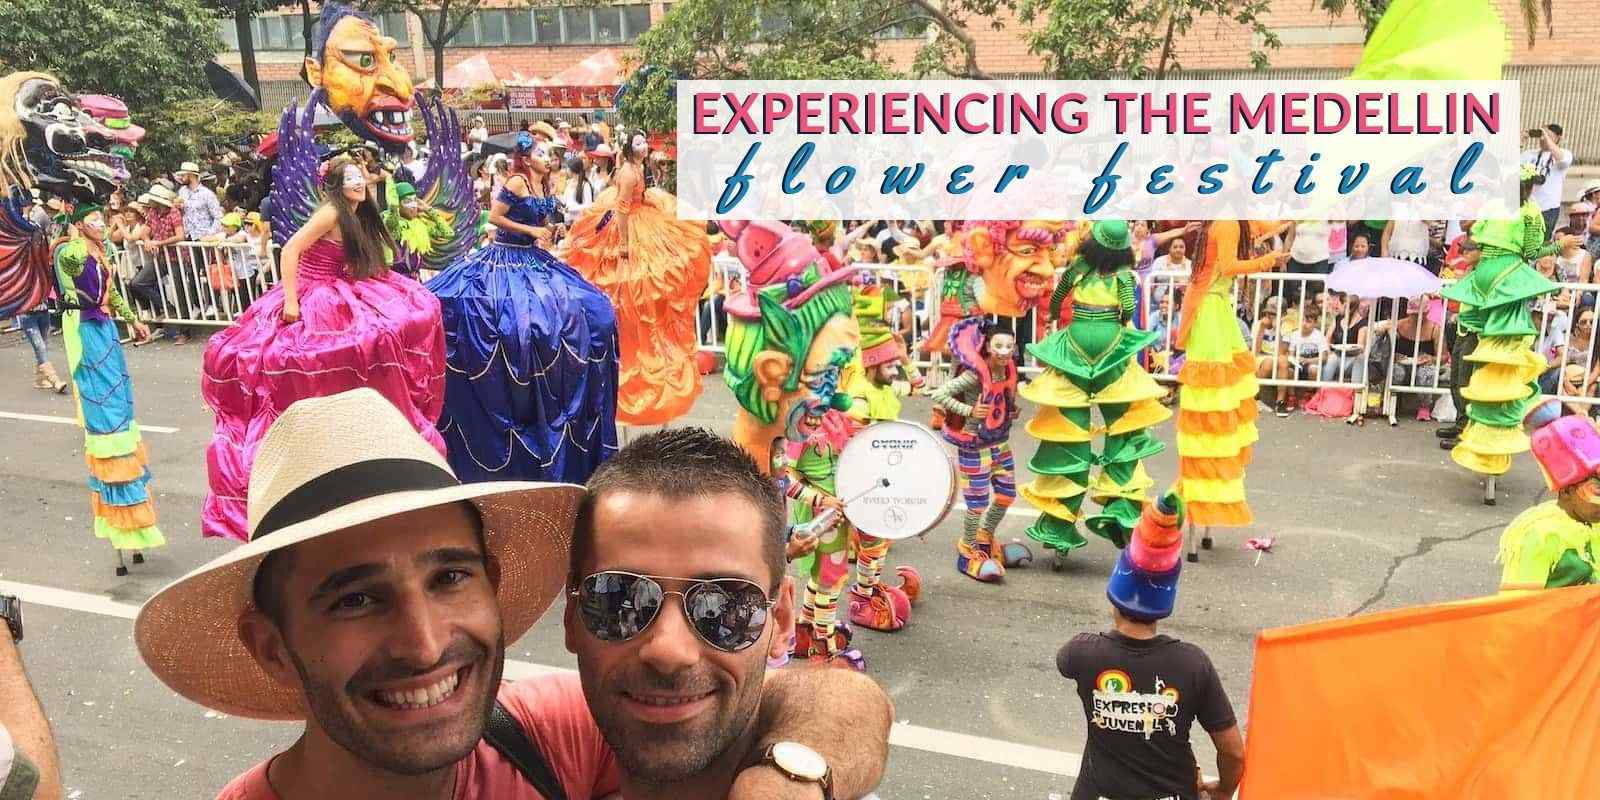 Read all about how to experience the Medellin Flower Festival as a gay couple